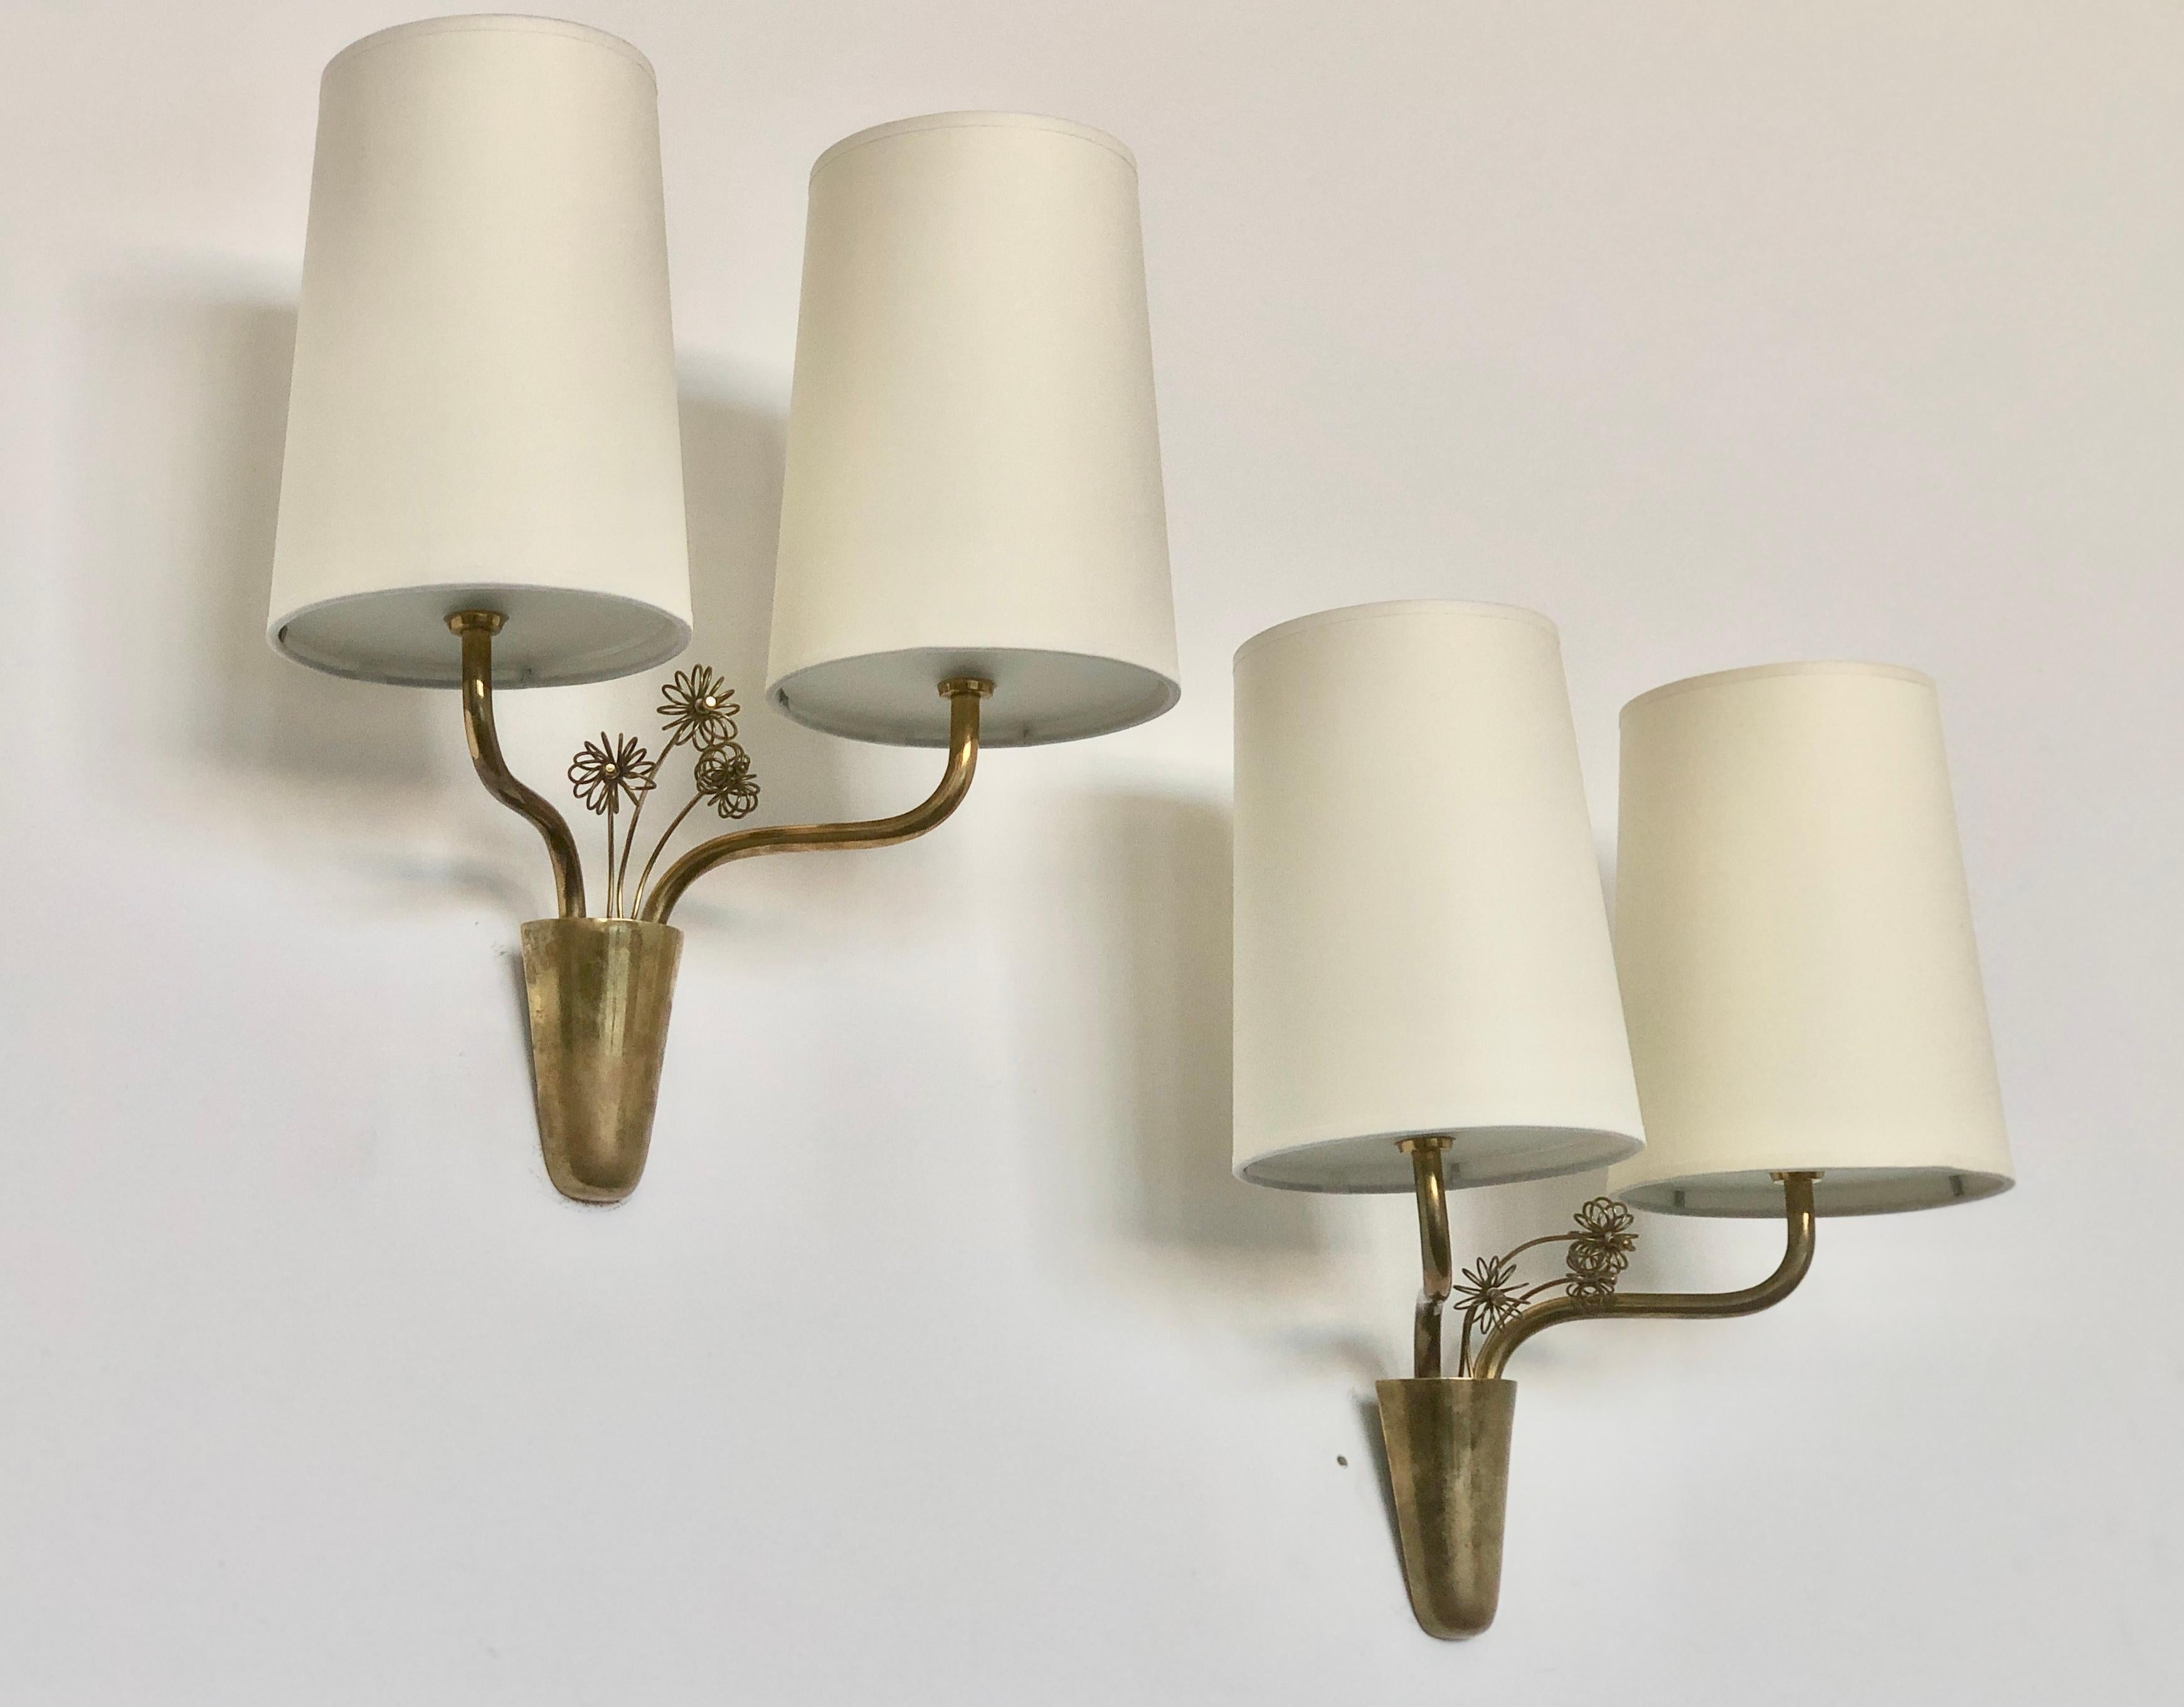 A pair of wall lights designed by Paavo Tynell for Idman, Finland , Circa 1950th.
Model Number 9445,  featured at Idman catalogue.
Brass, frosted glass and paper shades.
Rewiring available upon request.